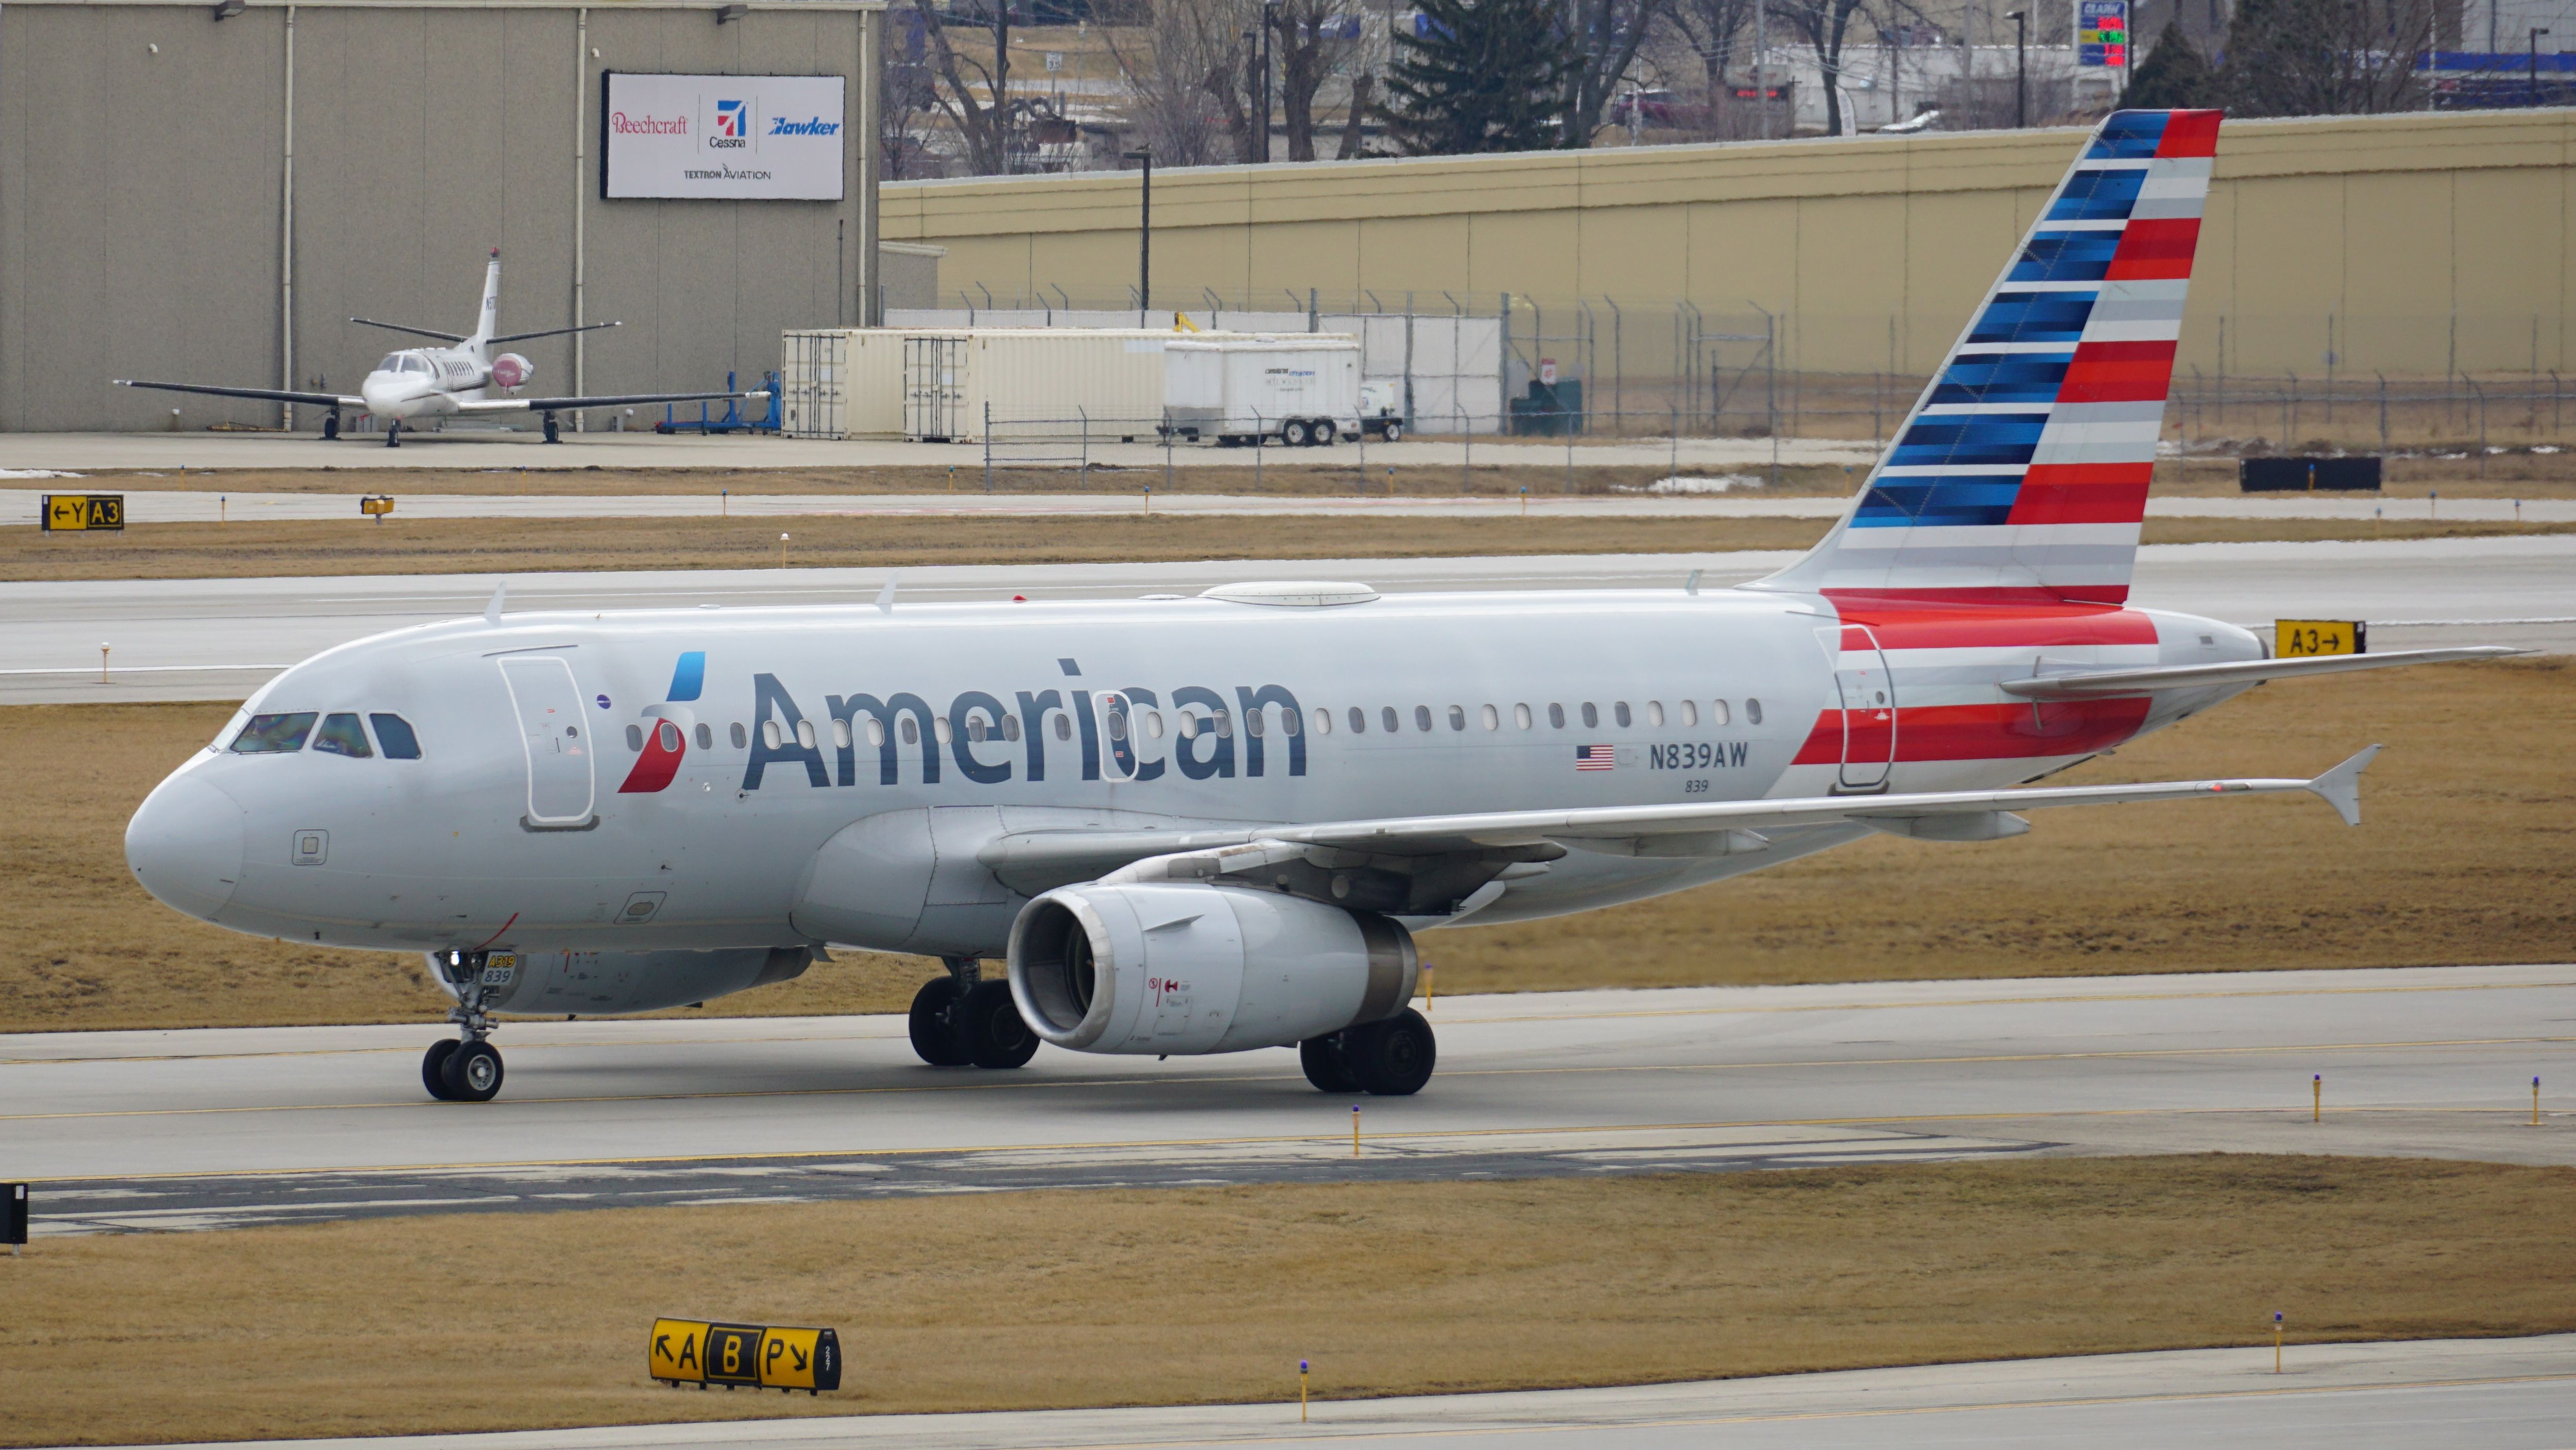 An American Airlines Airbus A319 taxis on the runway after landing at Milwaukee General Mitchell International Airport.